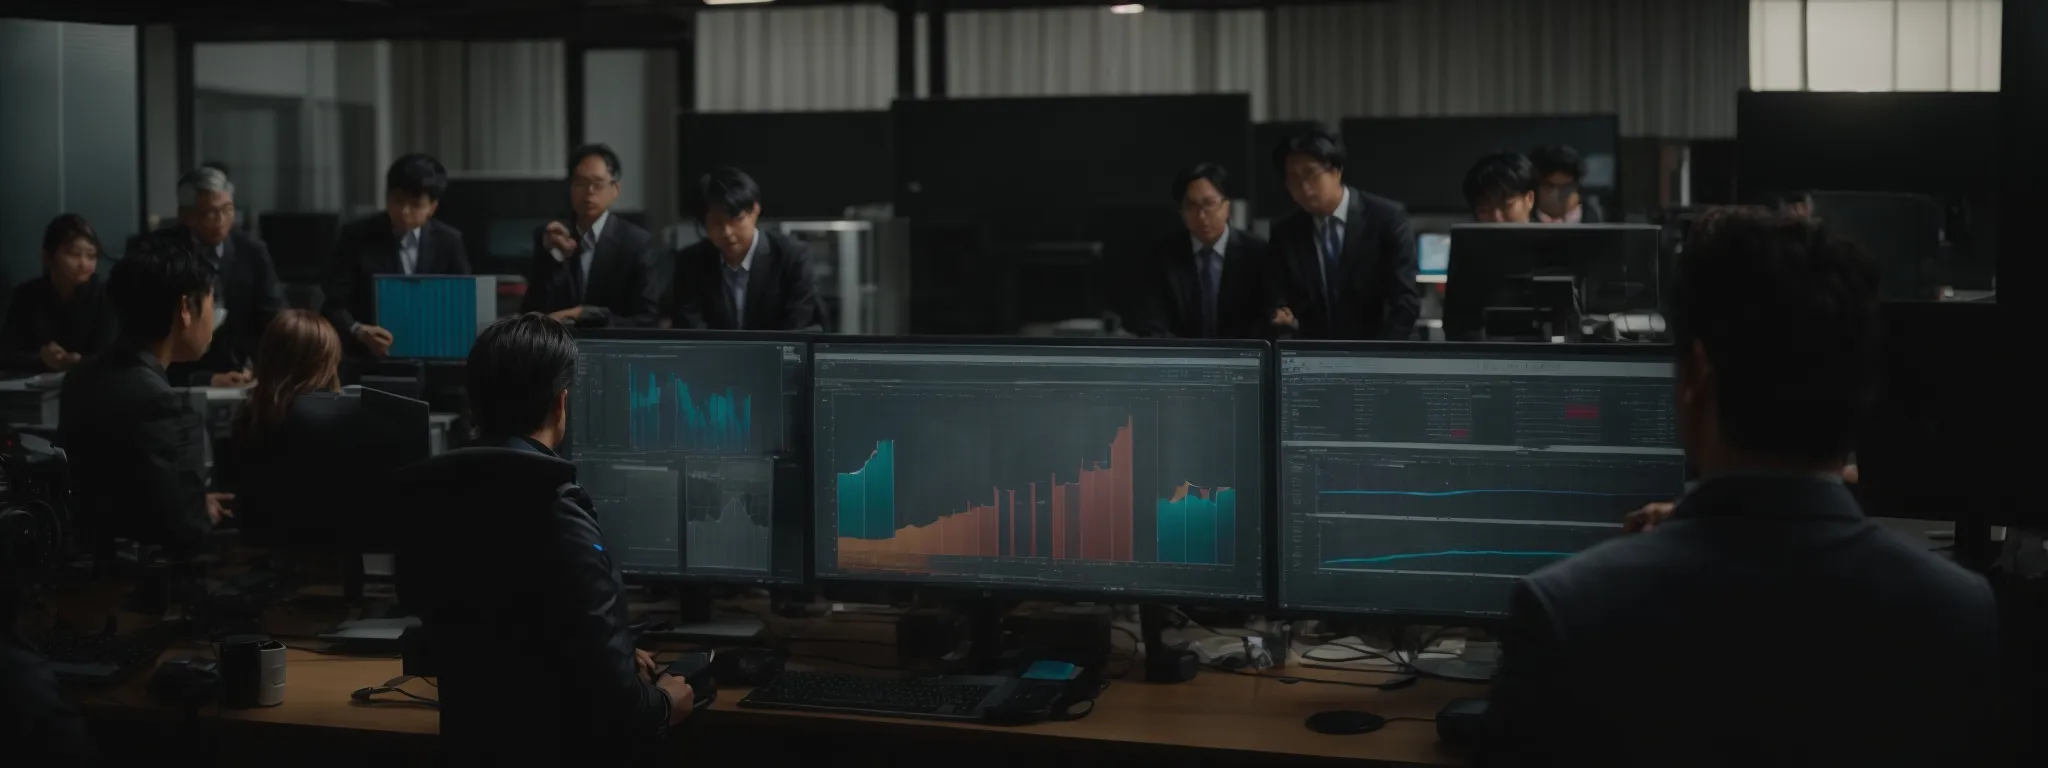 a team of professionals gather around a computer analyzing data charts to improve seo strategy.